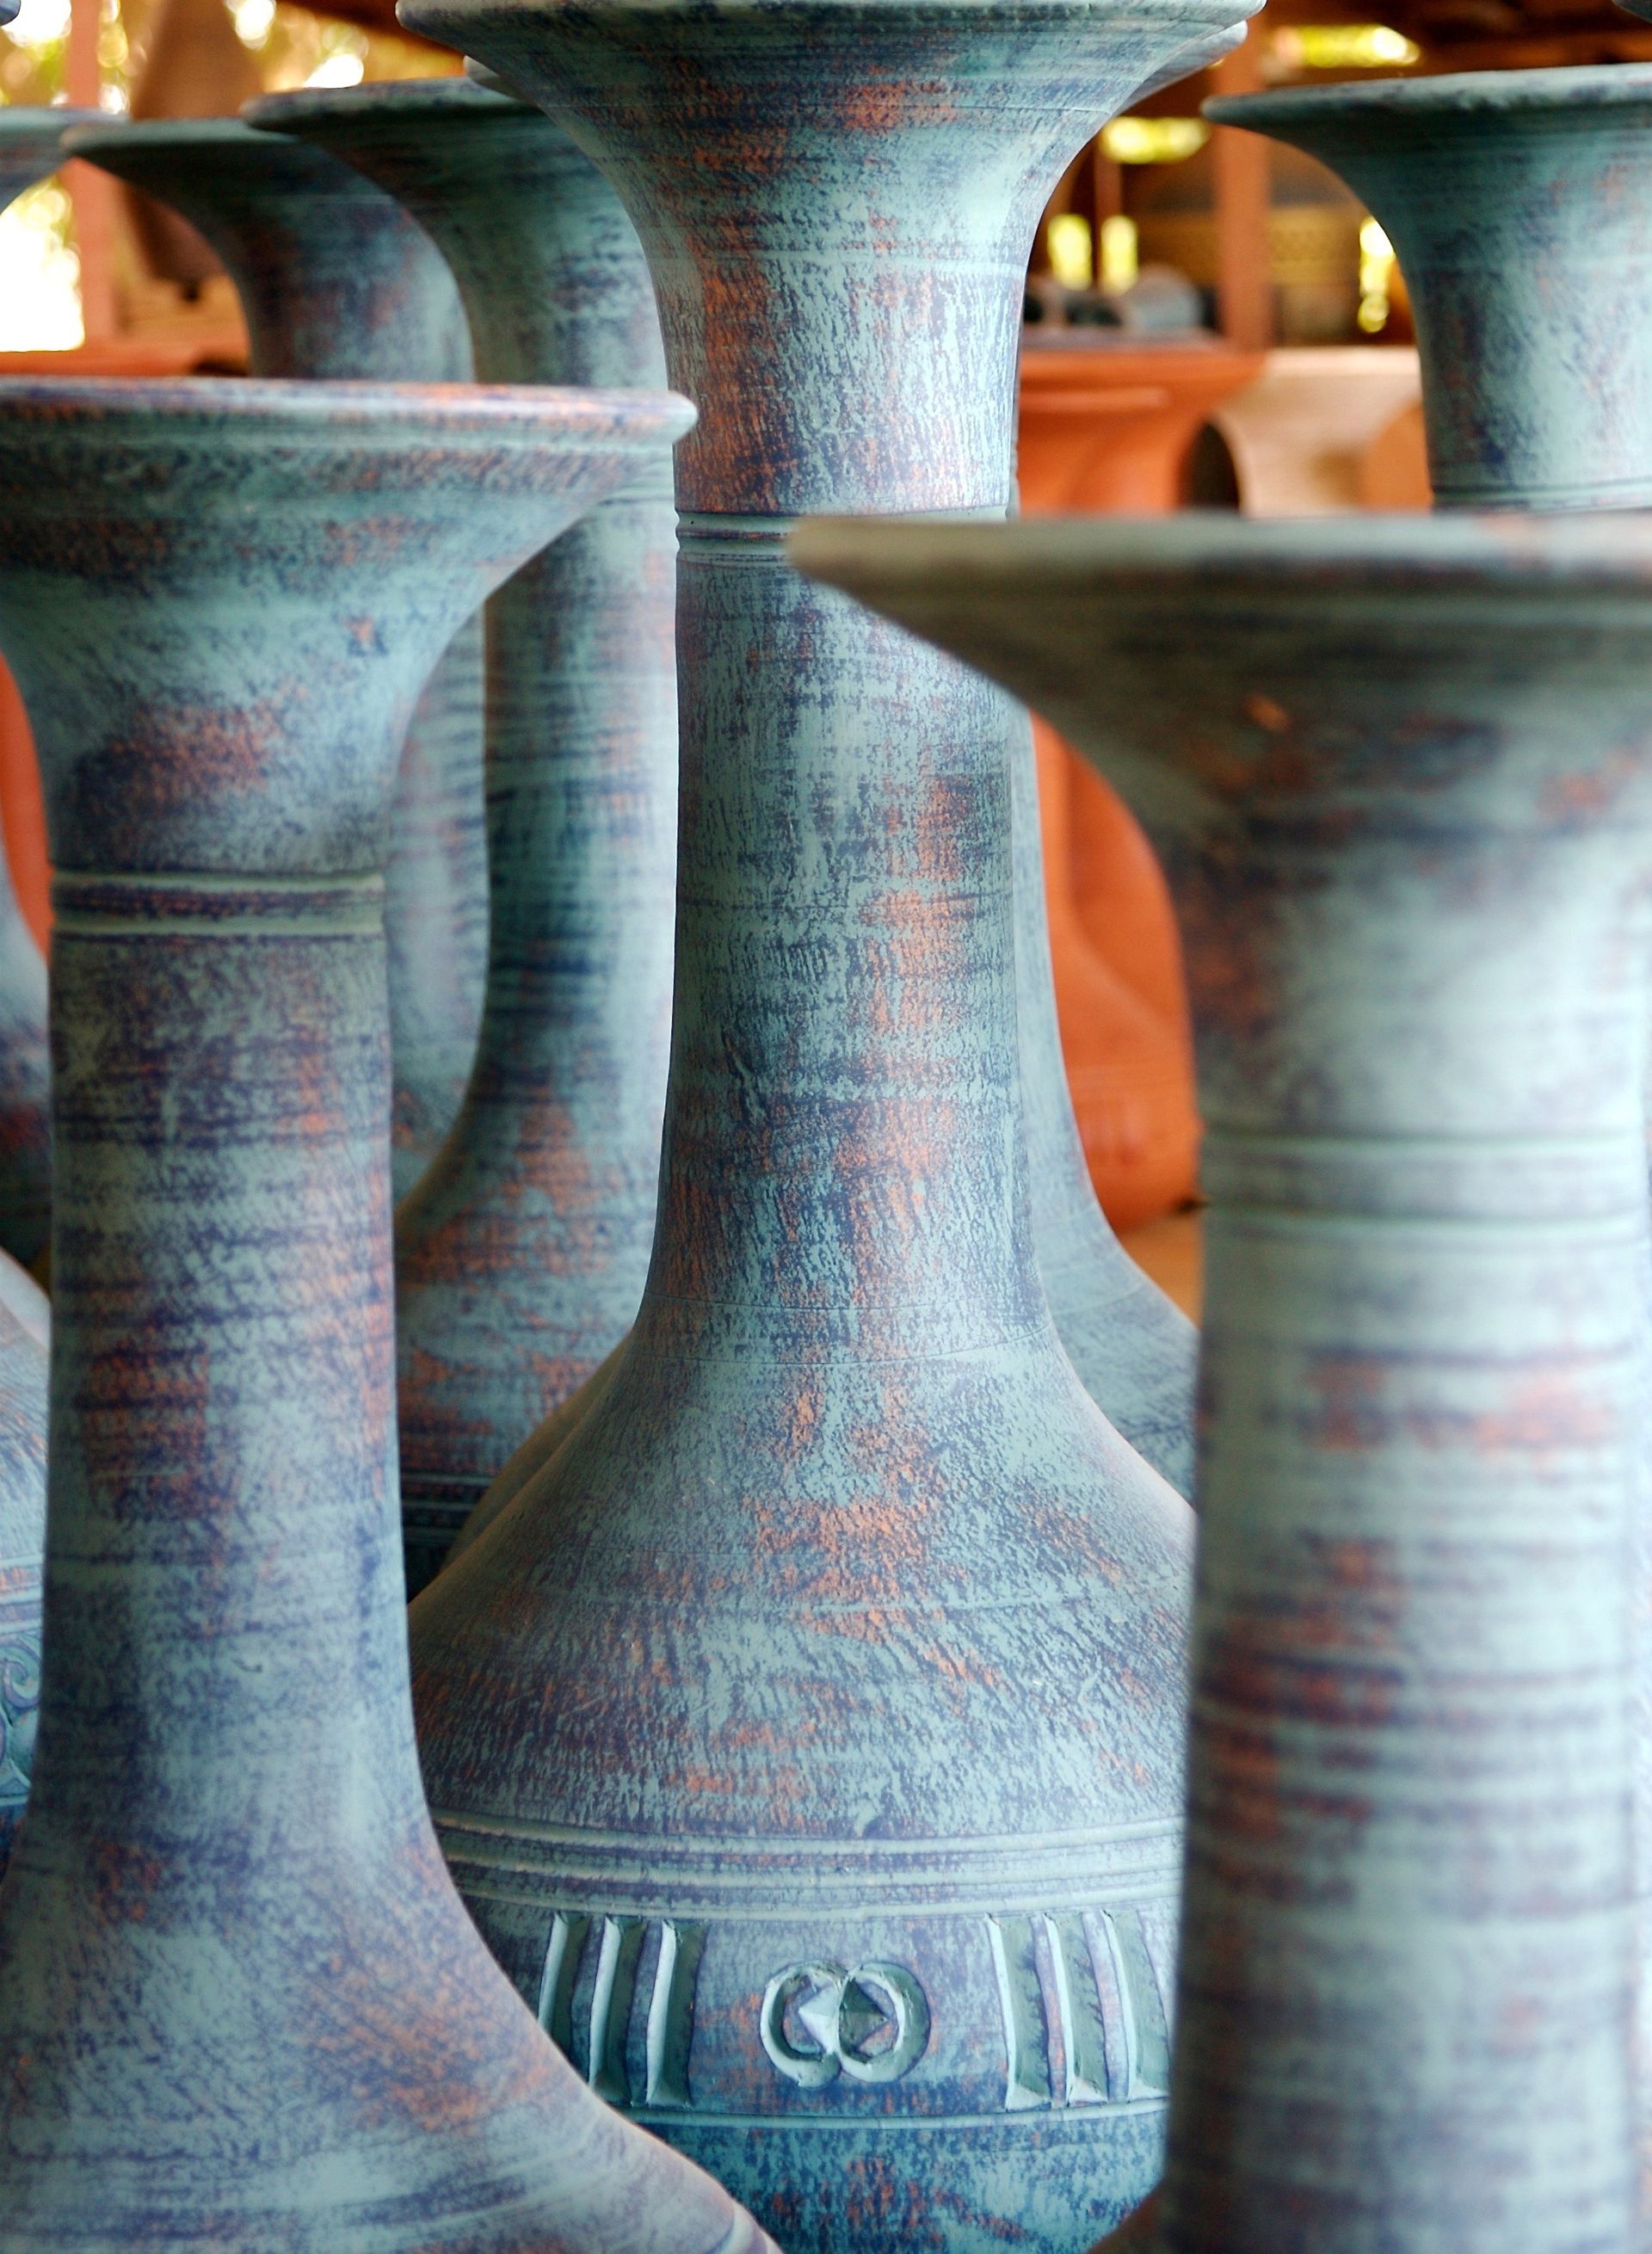 Large pots with long necks and wide openings.